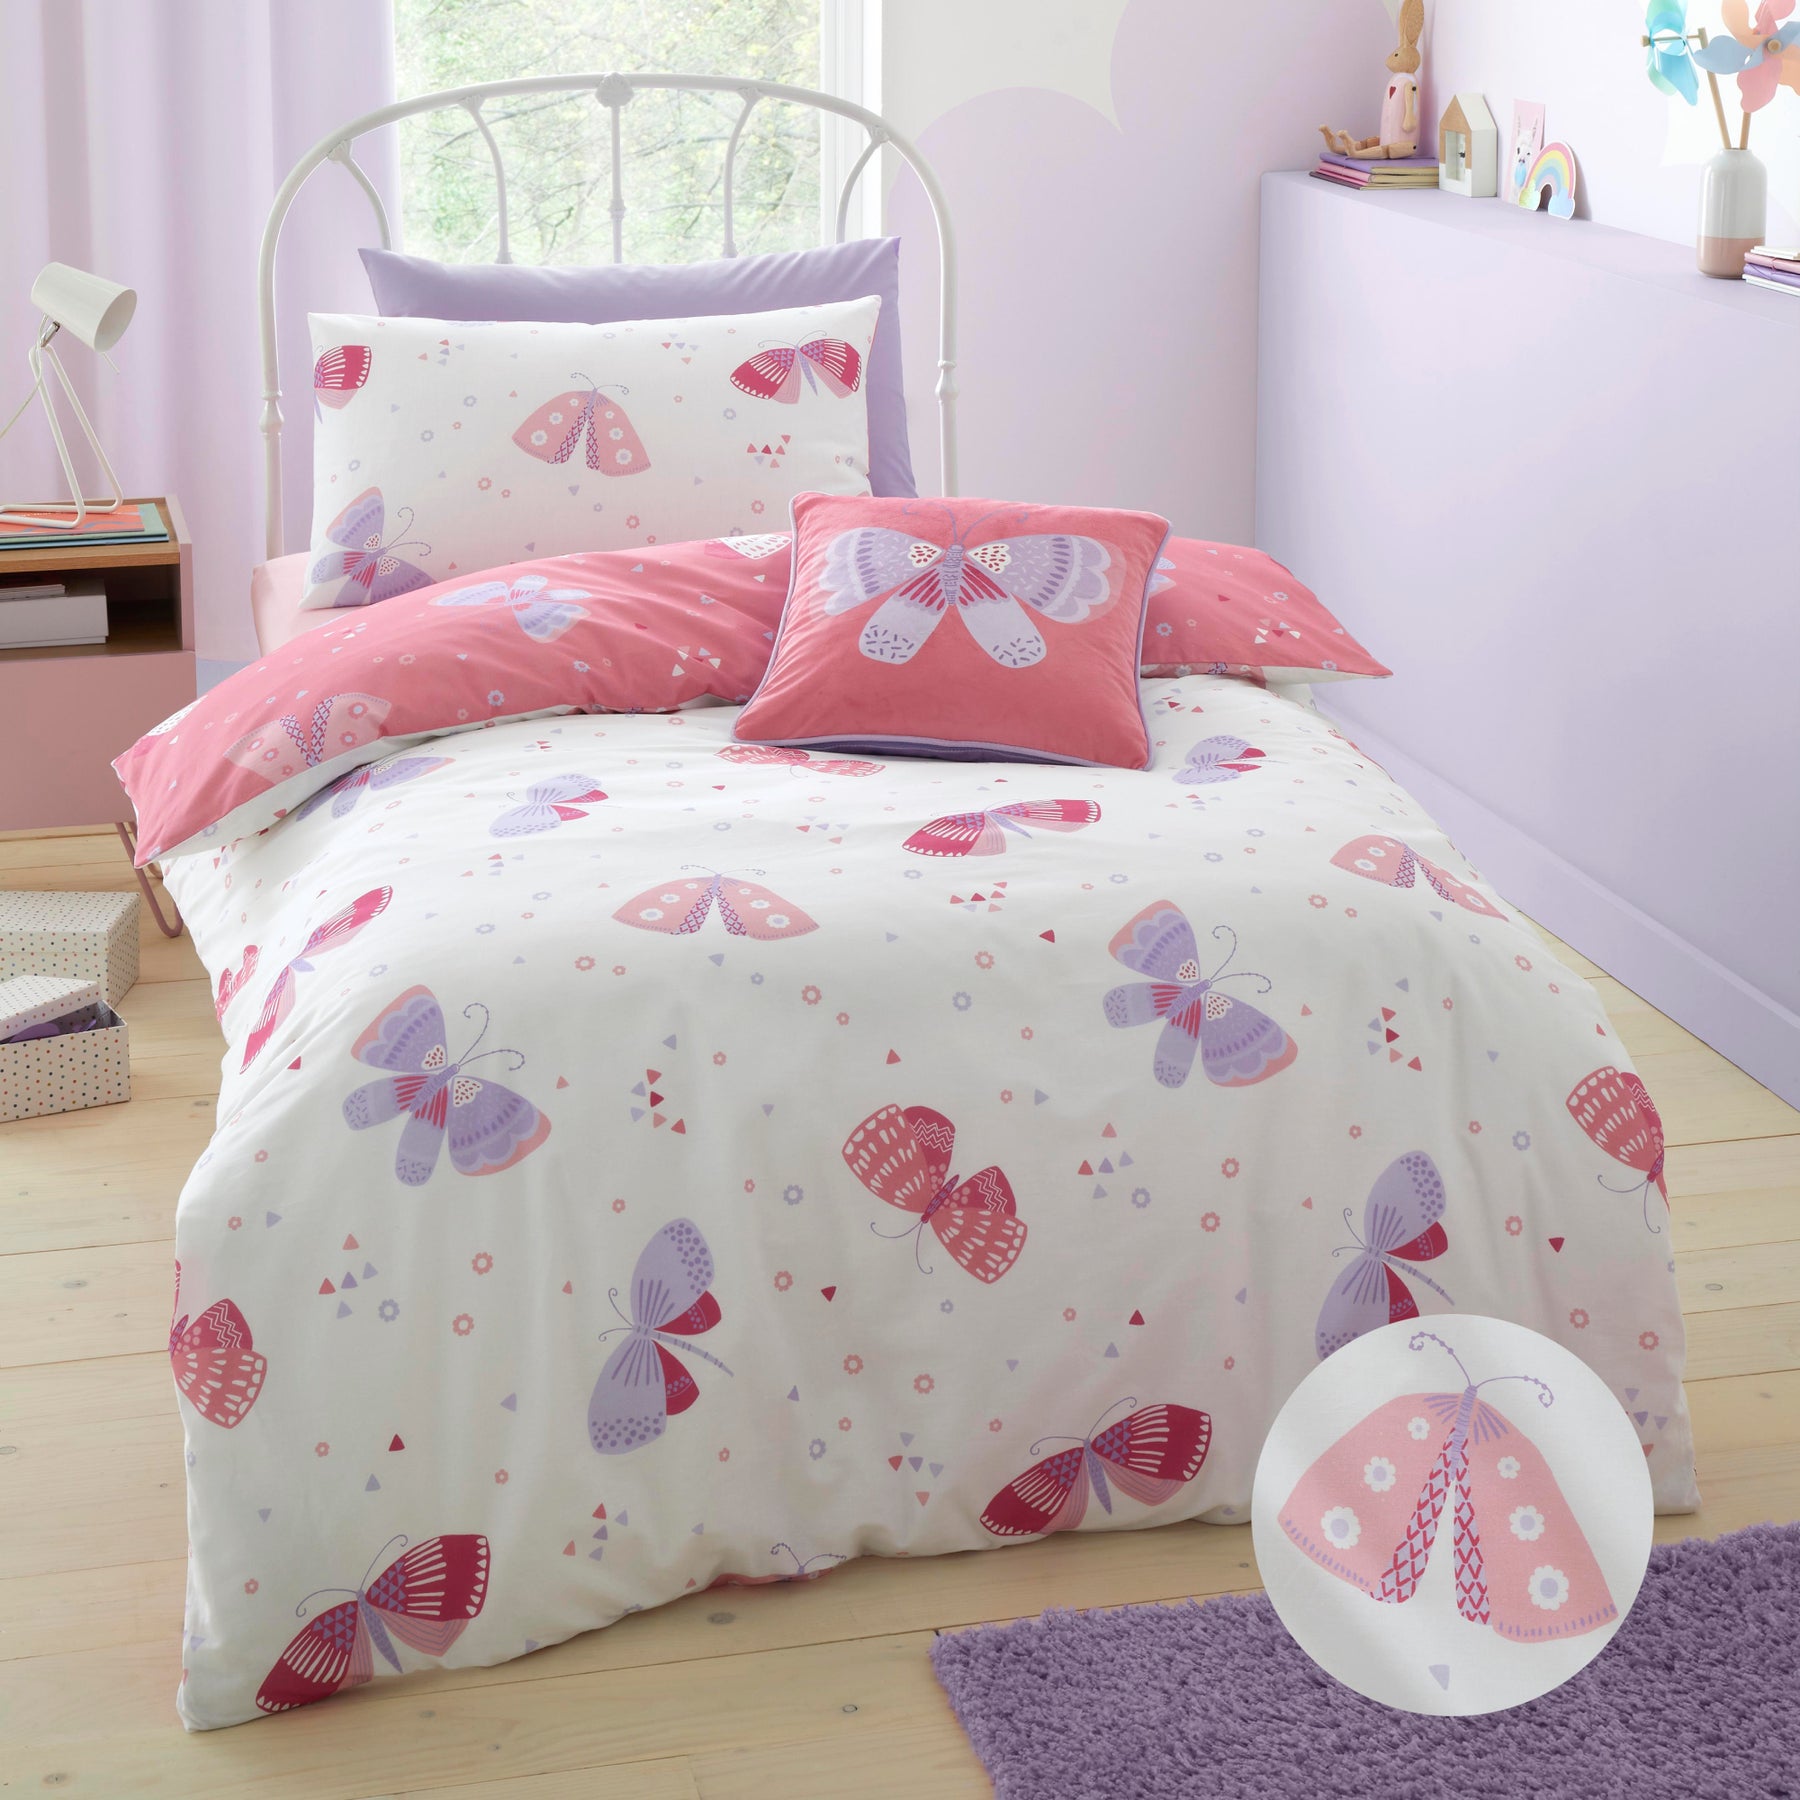 Flutterby Butterfly Childrens Bedding Pink